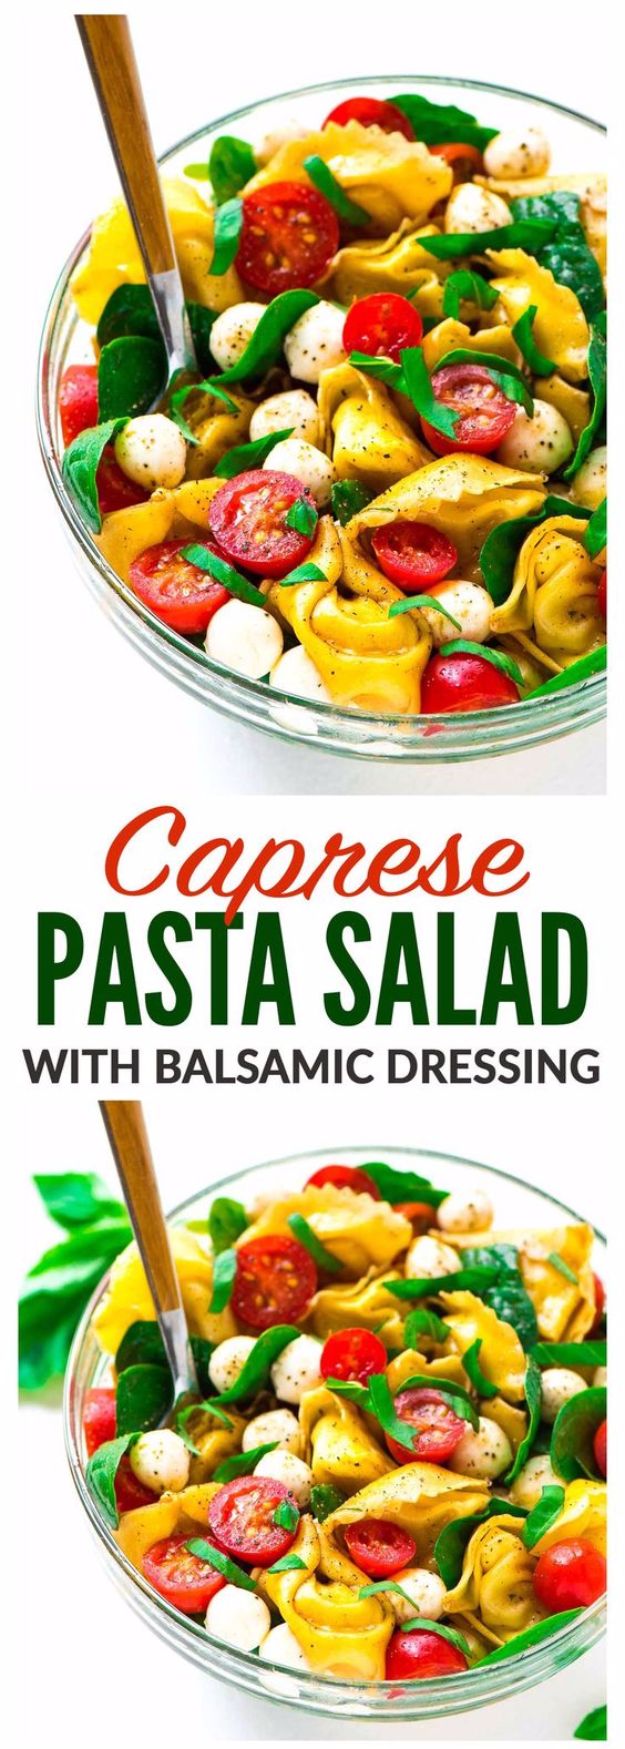 Best Recipe Ideas for Summer - Caprese Pasta Salad - Cool Salads, Easy Side Dishes, Recipes for Summer Foods and Dinner to Beat the Heat - Light and Healthy Ideas for Hot Summer Nights, Pool Parties and Picnics http://diyjoy.com/best-recipes-summer